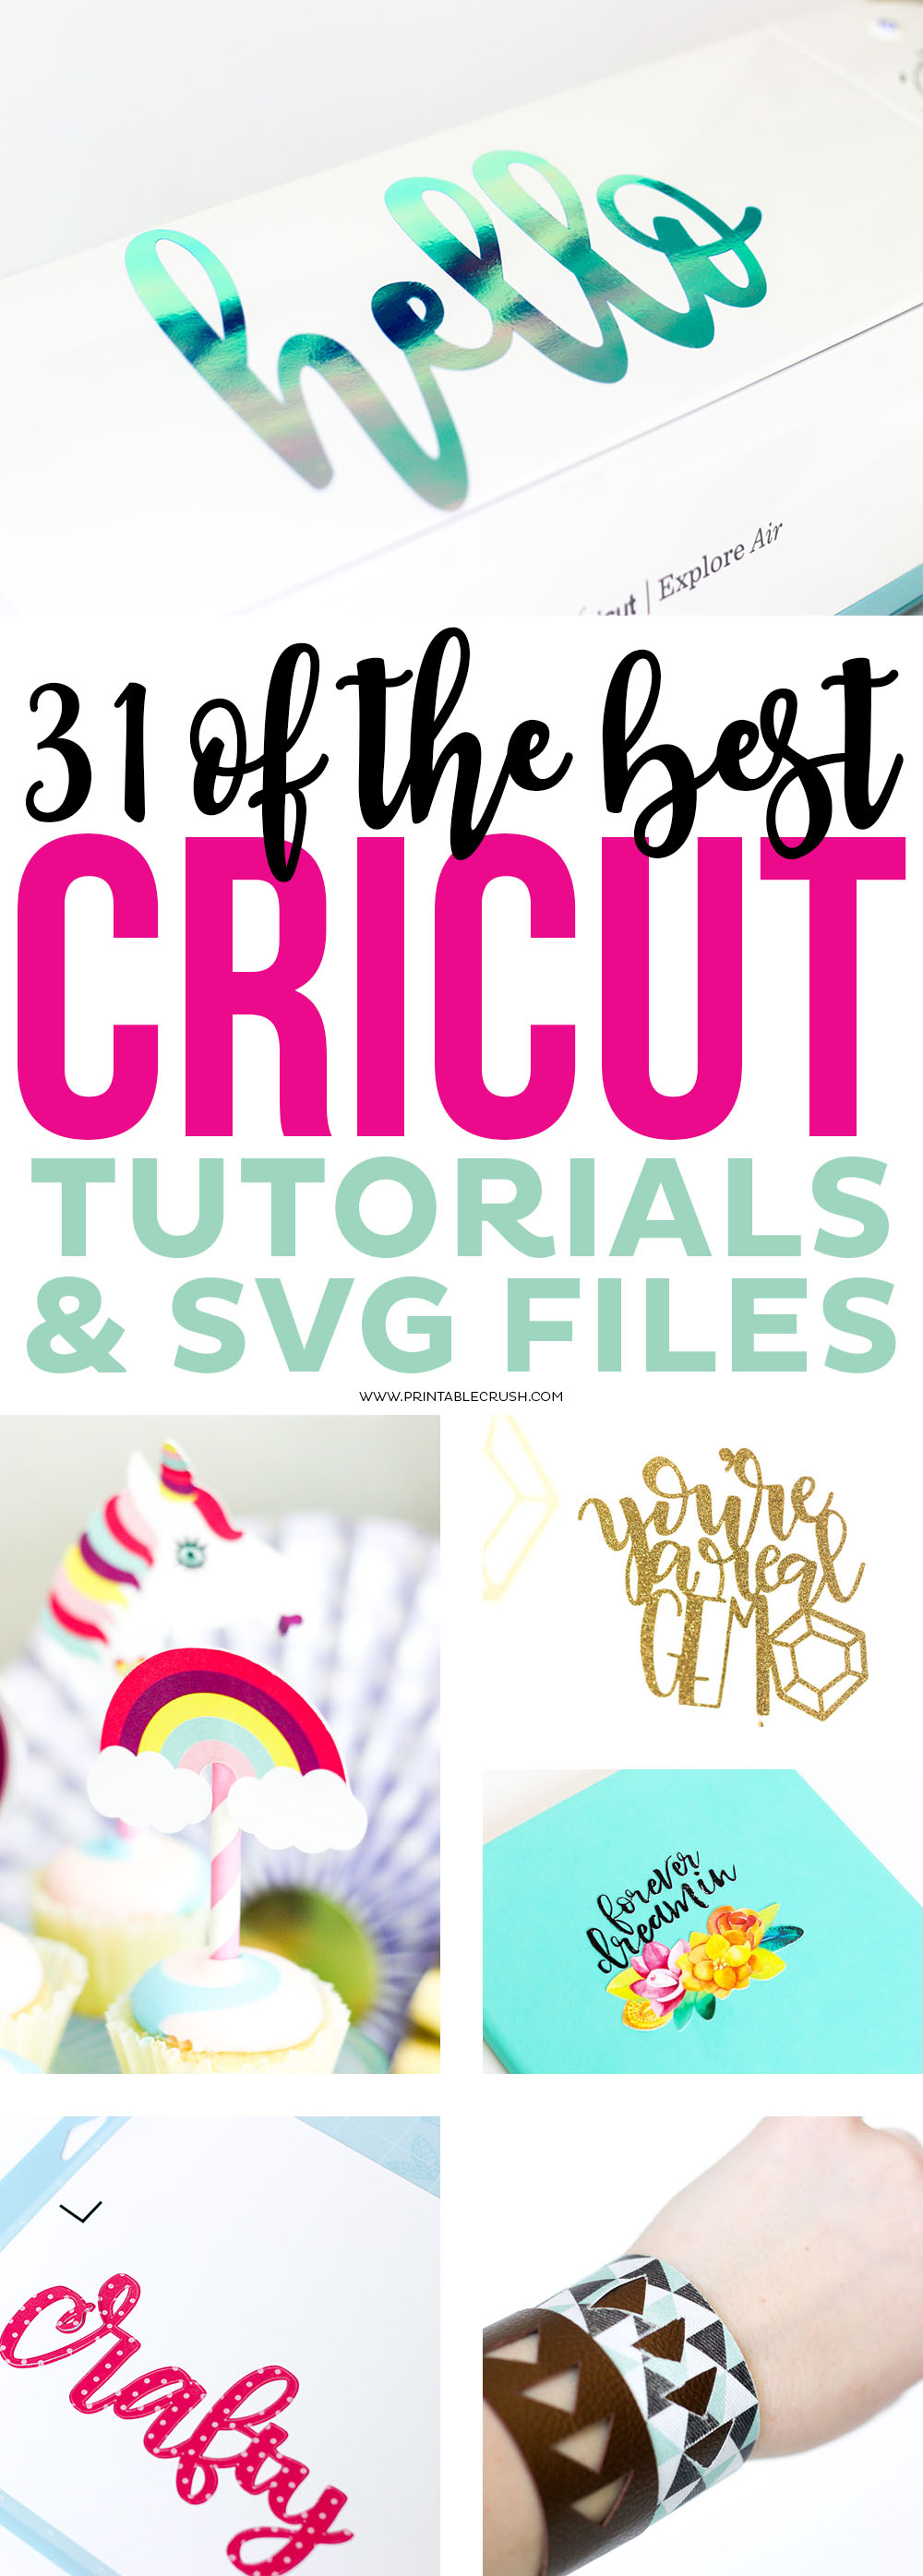 Download 31 of the BEST Cricut Tutorials and SVG Files - Printable ...